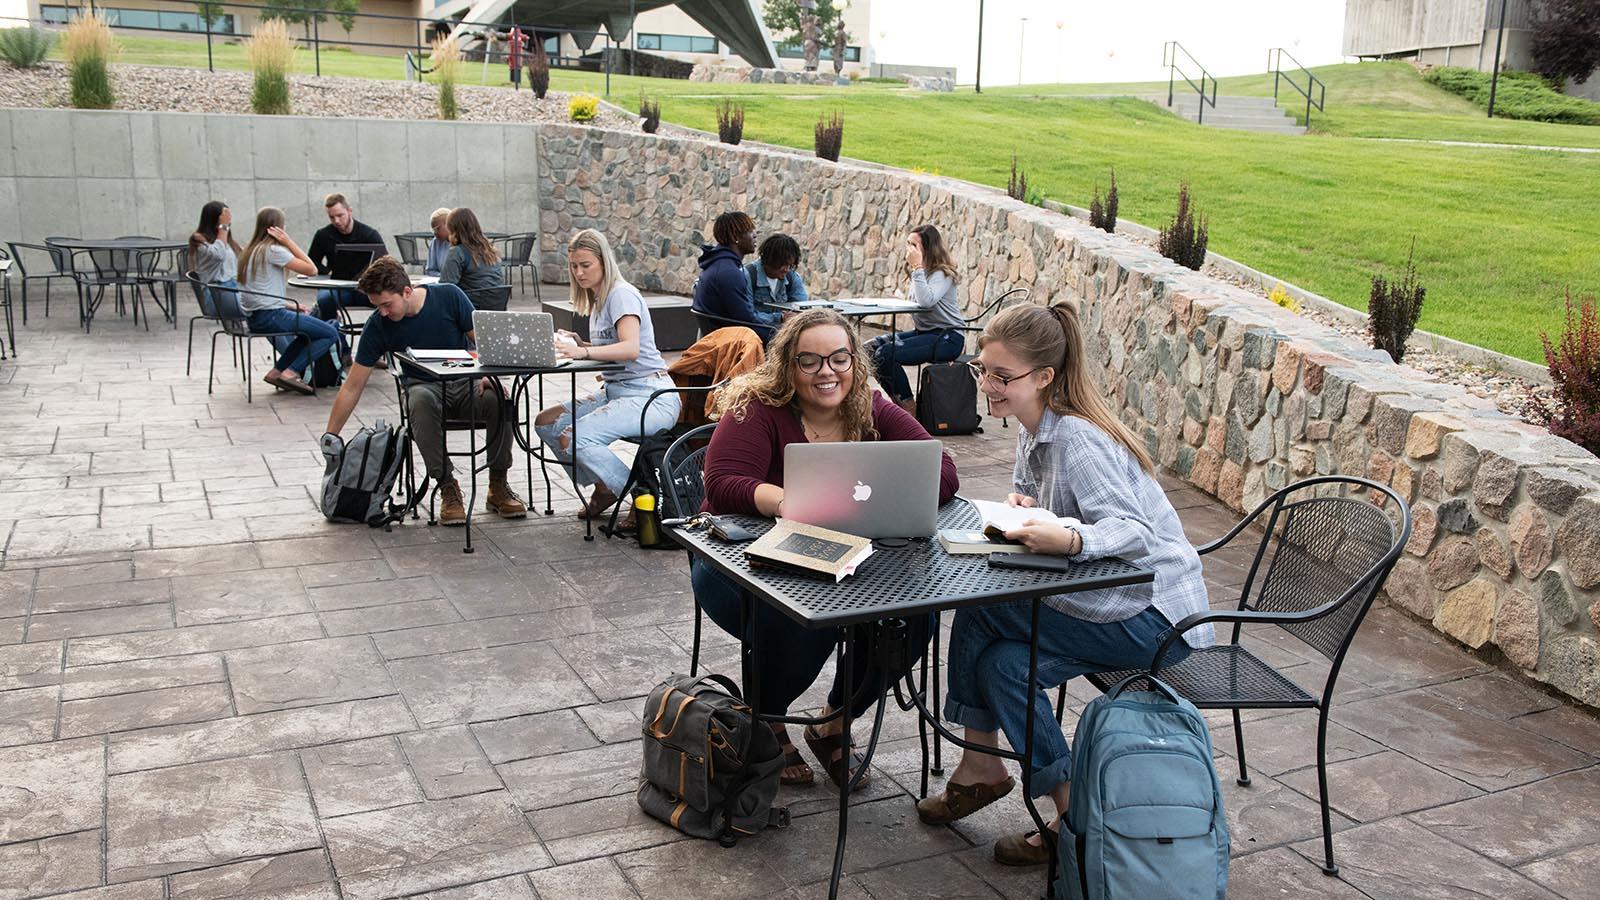 Several year-round campus students sitting at tables on a patio studying with laptops open